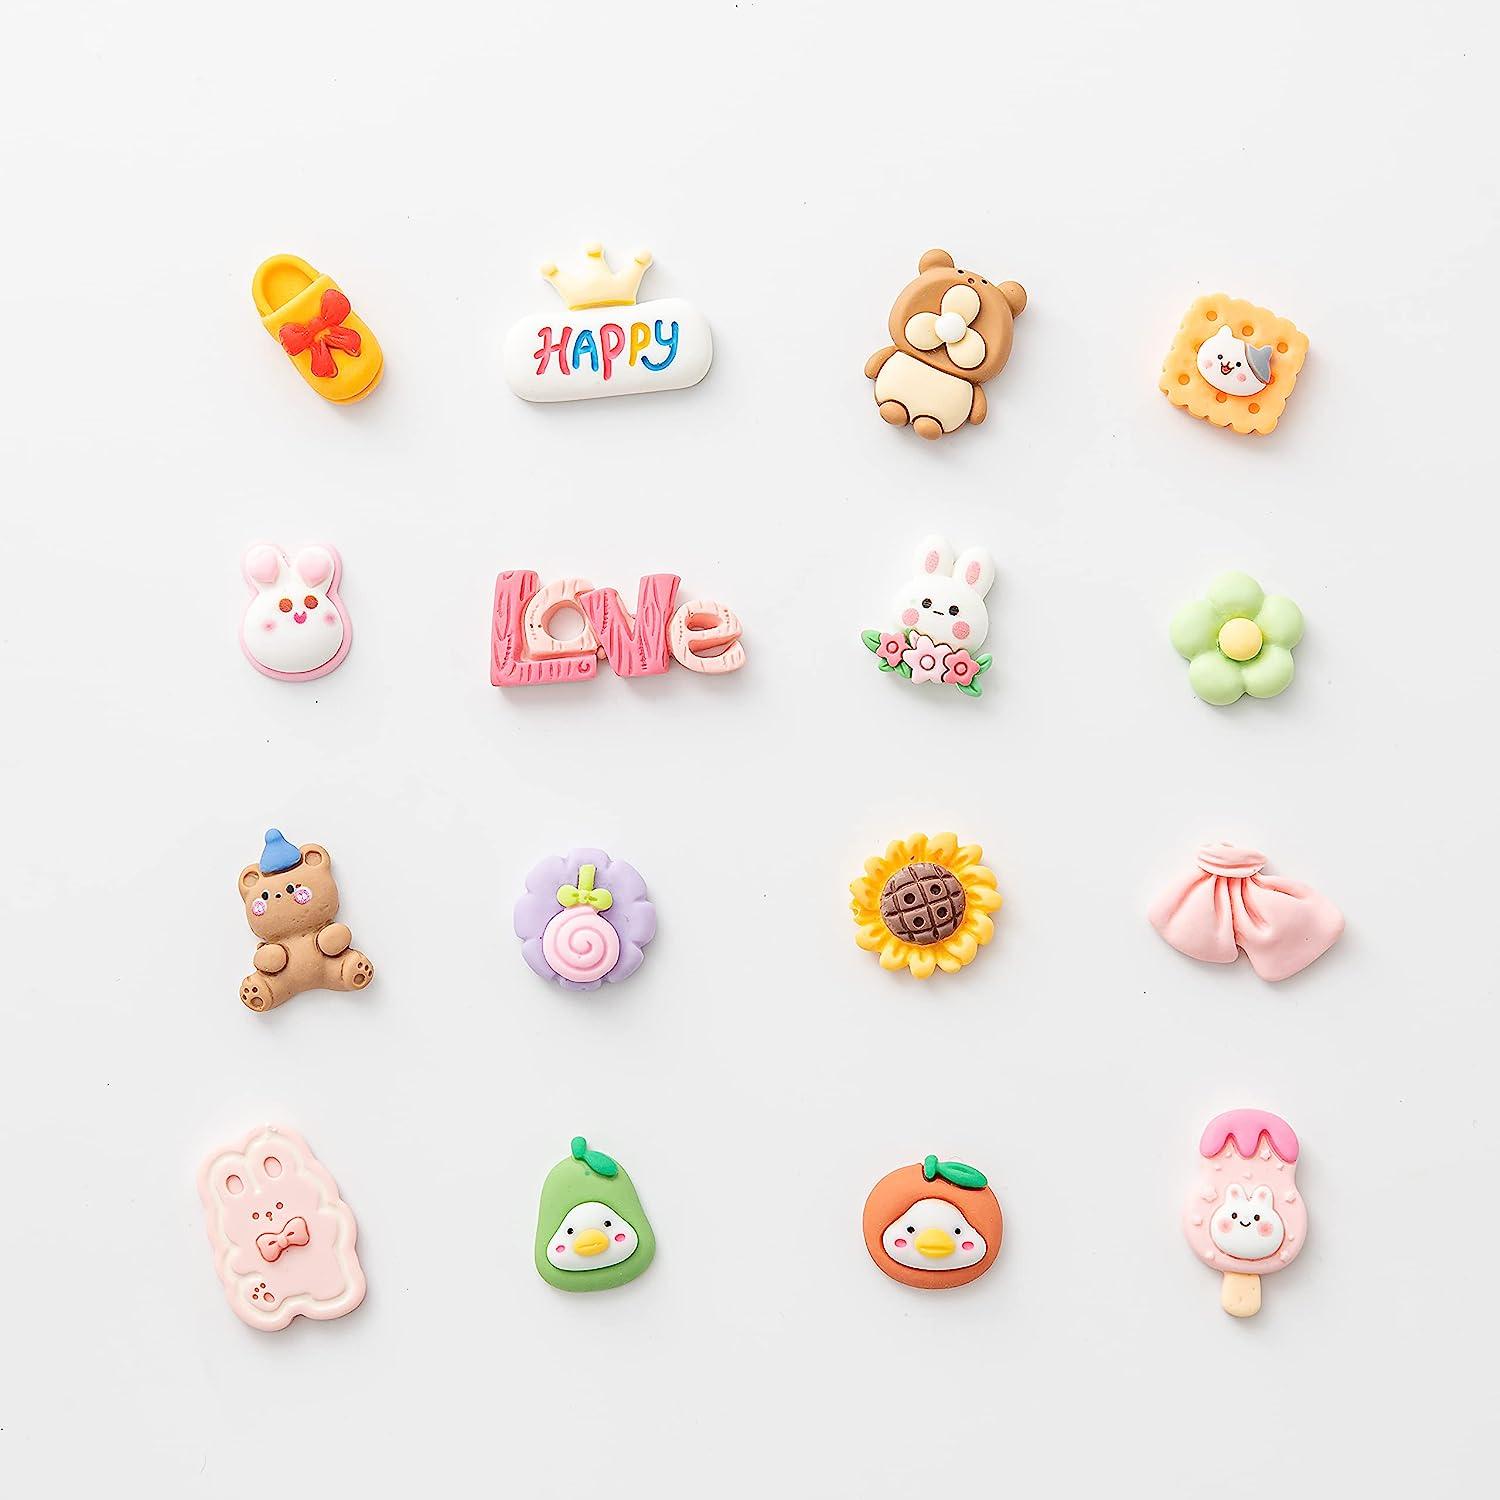 Slime Charms Cartoons Charms Cute Set - Mixed Lot Assorted Kawaii Charms Resin Flatback for DIY Crafts Making,Decorations,Scrapbooking